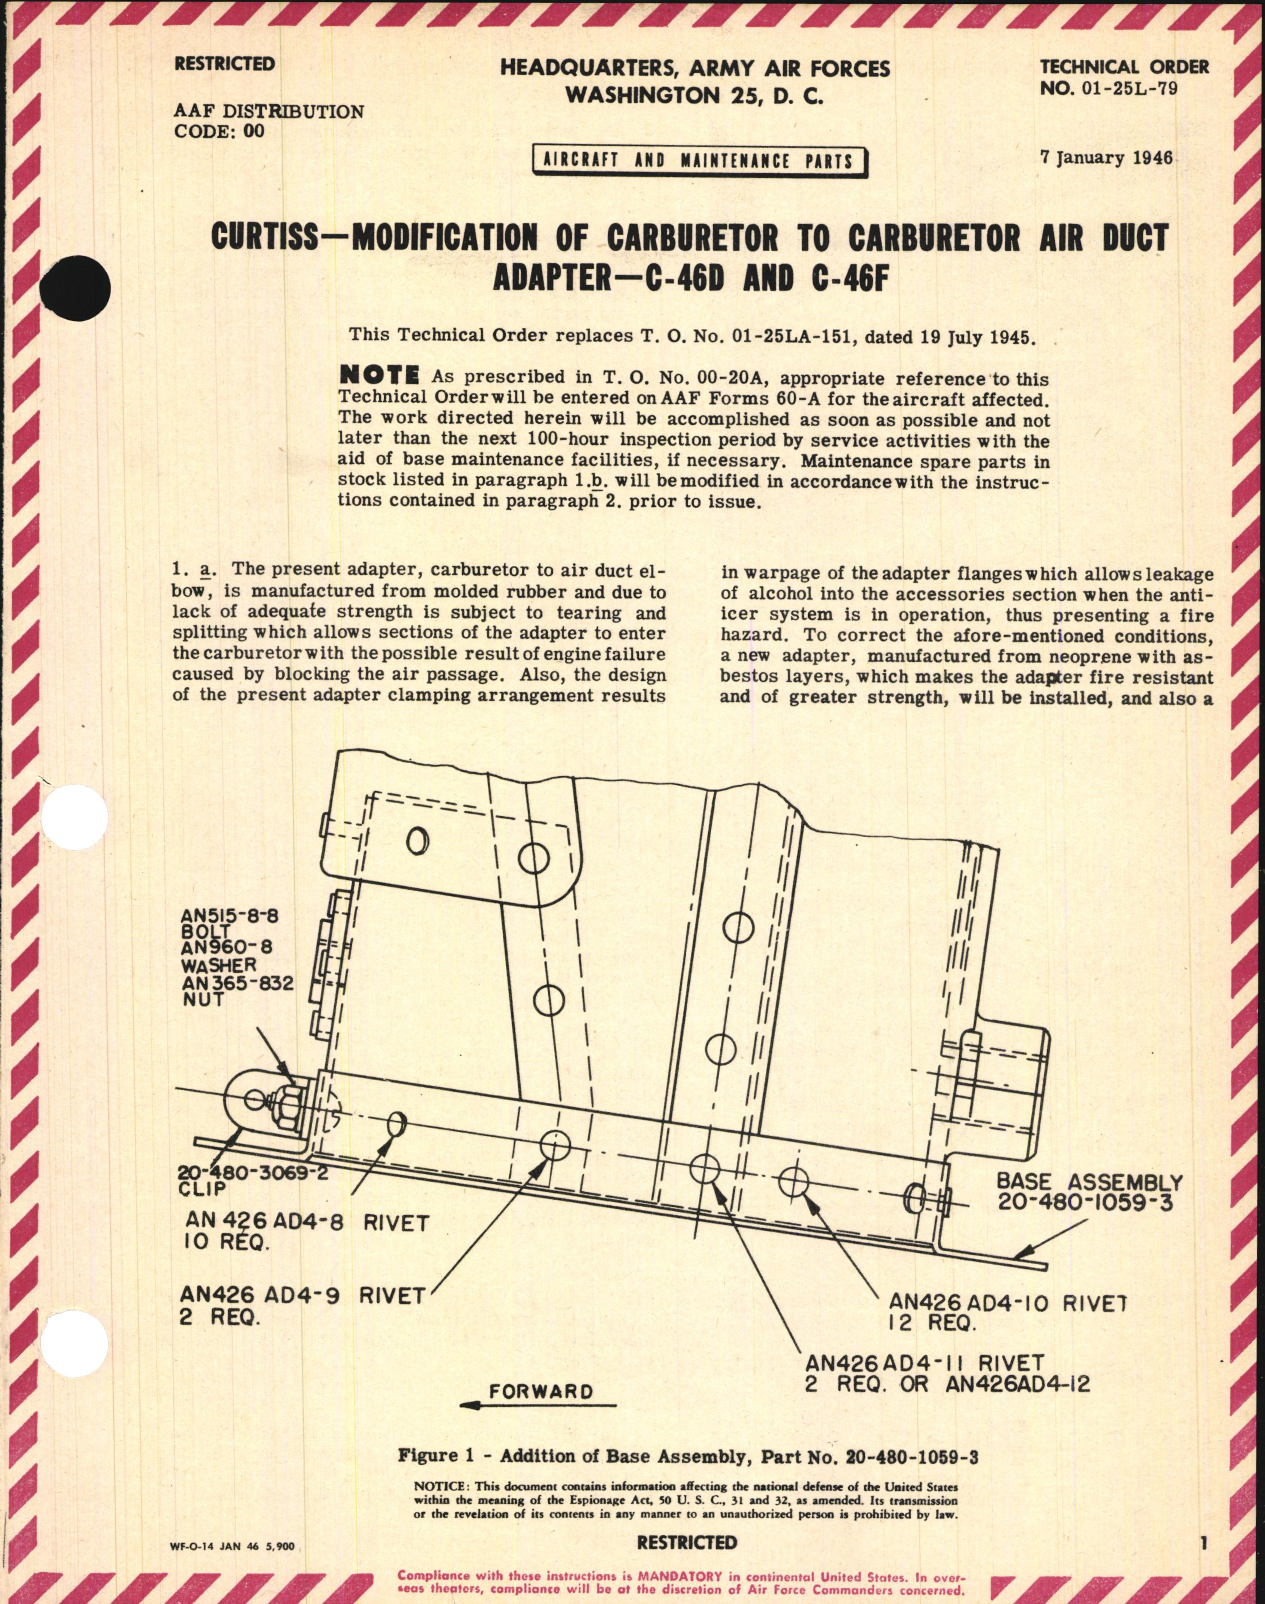 Sample page 1 from AirCorps Library document: Modification of Carburetor to Carburetor Air Duct Adapter for C-46D and C-46F